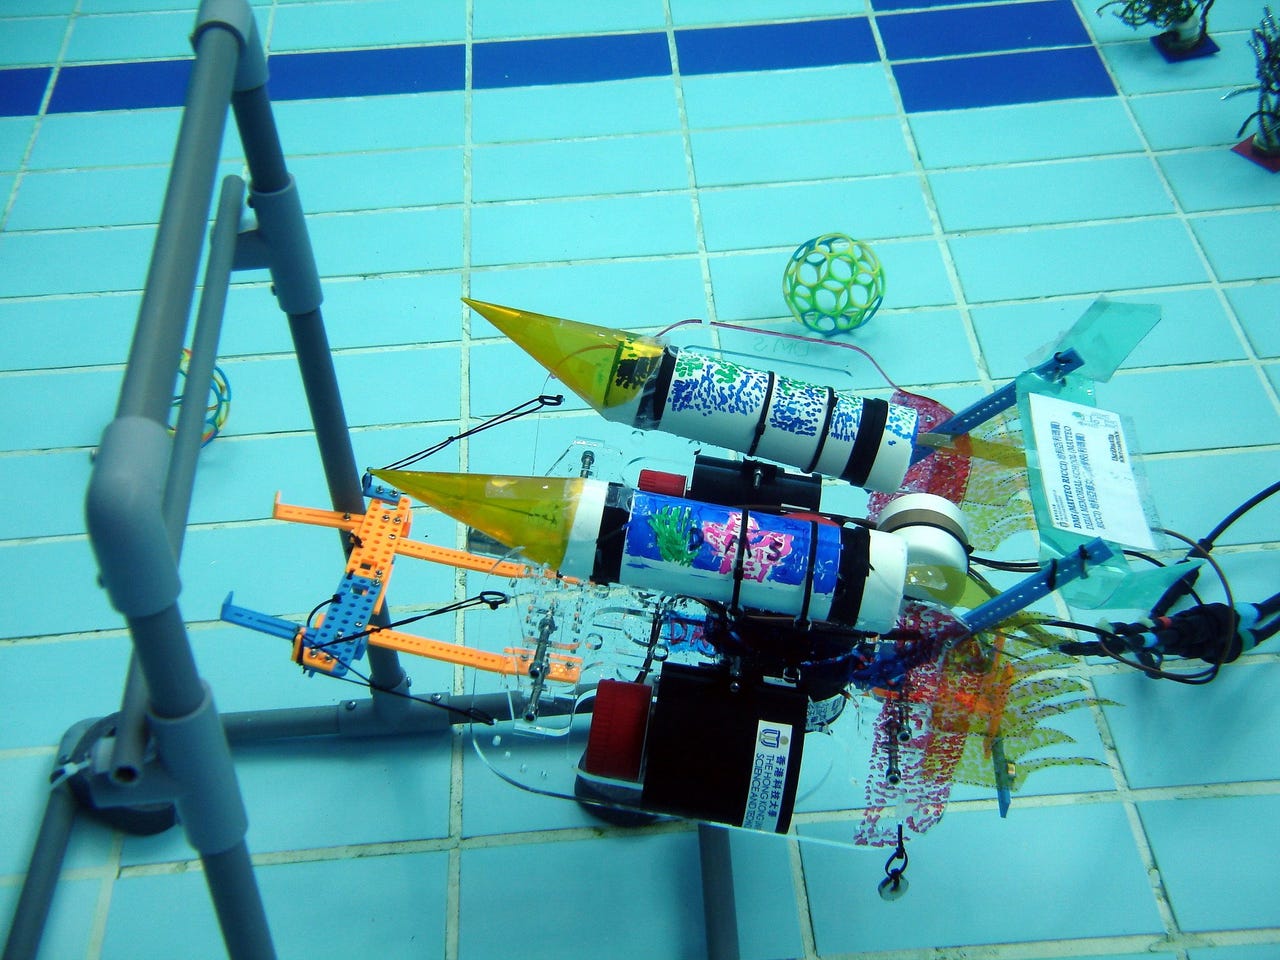 An underwater robot attempts to navigate an obstacle.